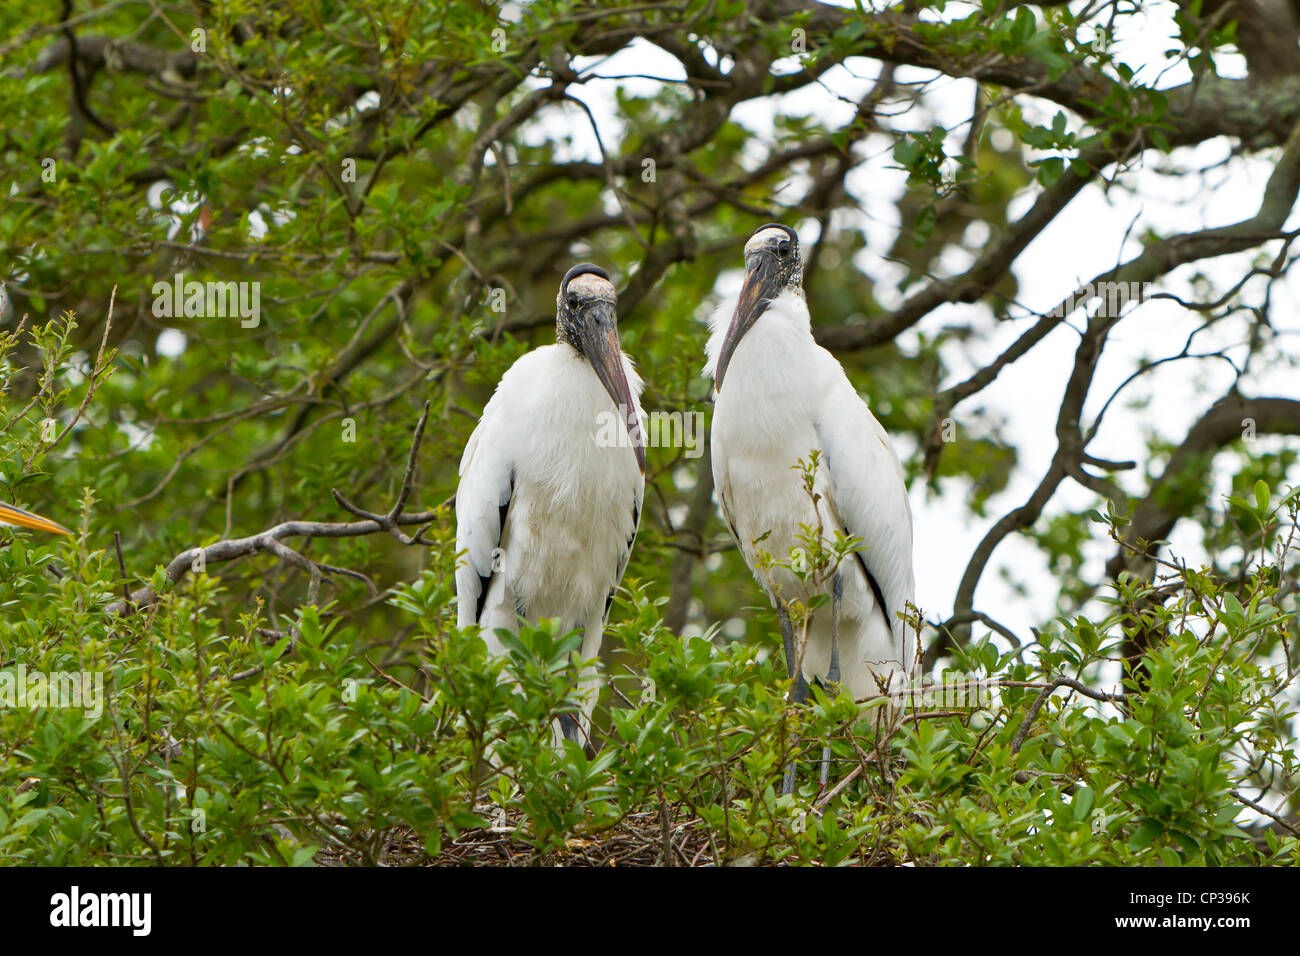 A nesting pair of wood storks at the Alligator Farm rookery in St. Augustine, Florida, USA. Stock Photo